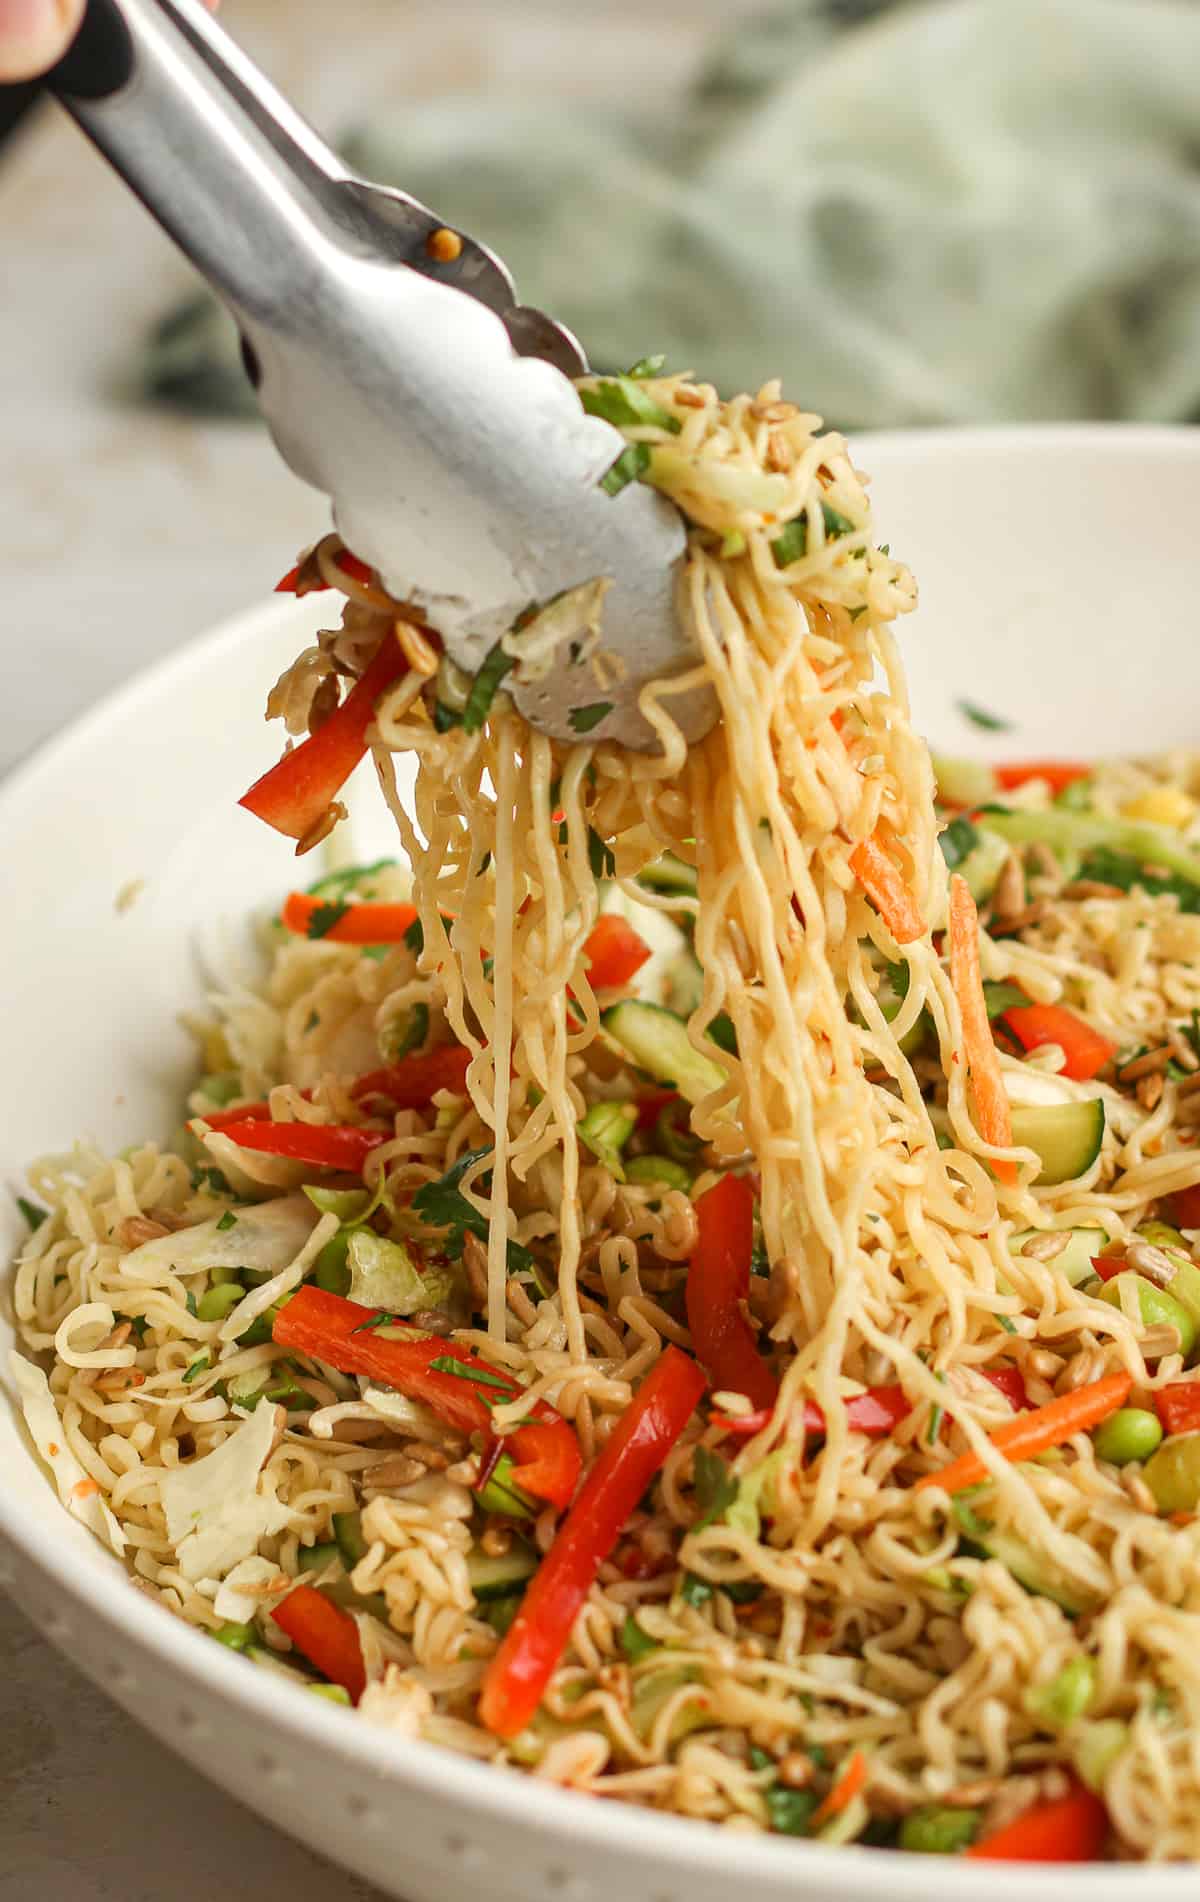 A salad tongs lifting some of the ramen salad out of the bowl.